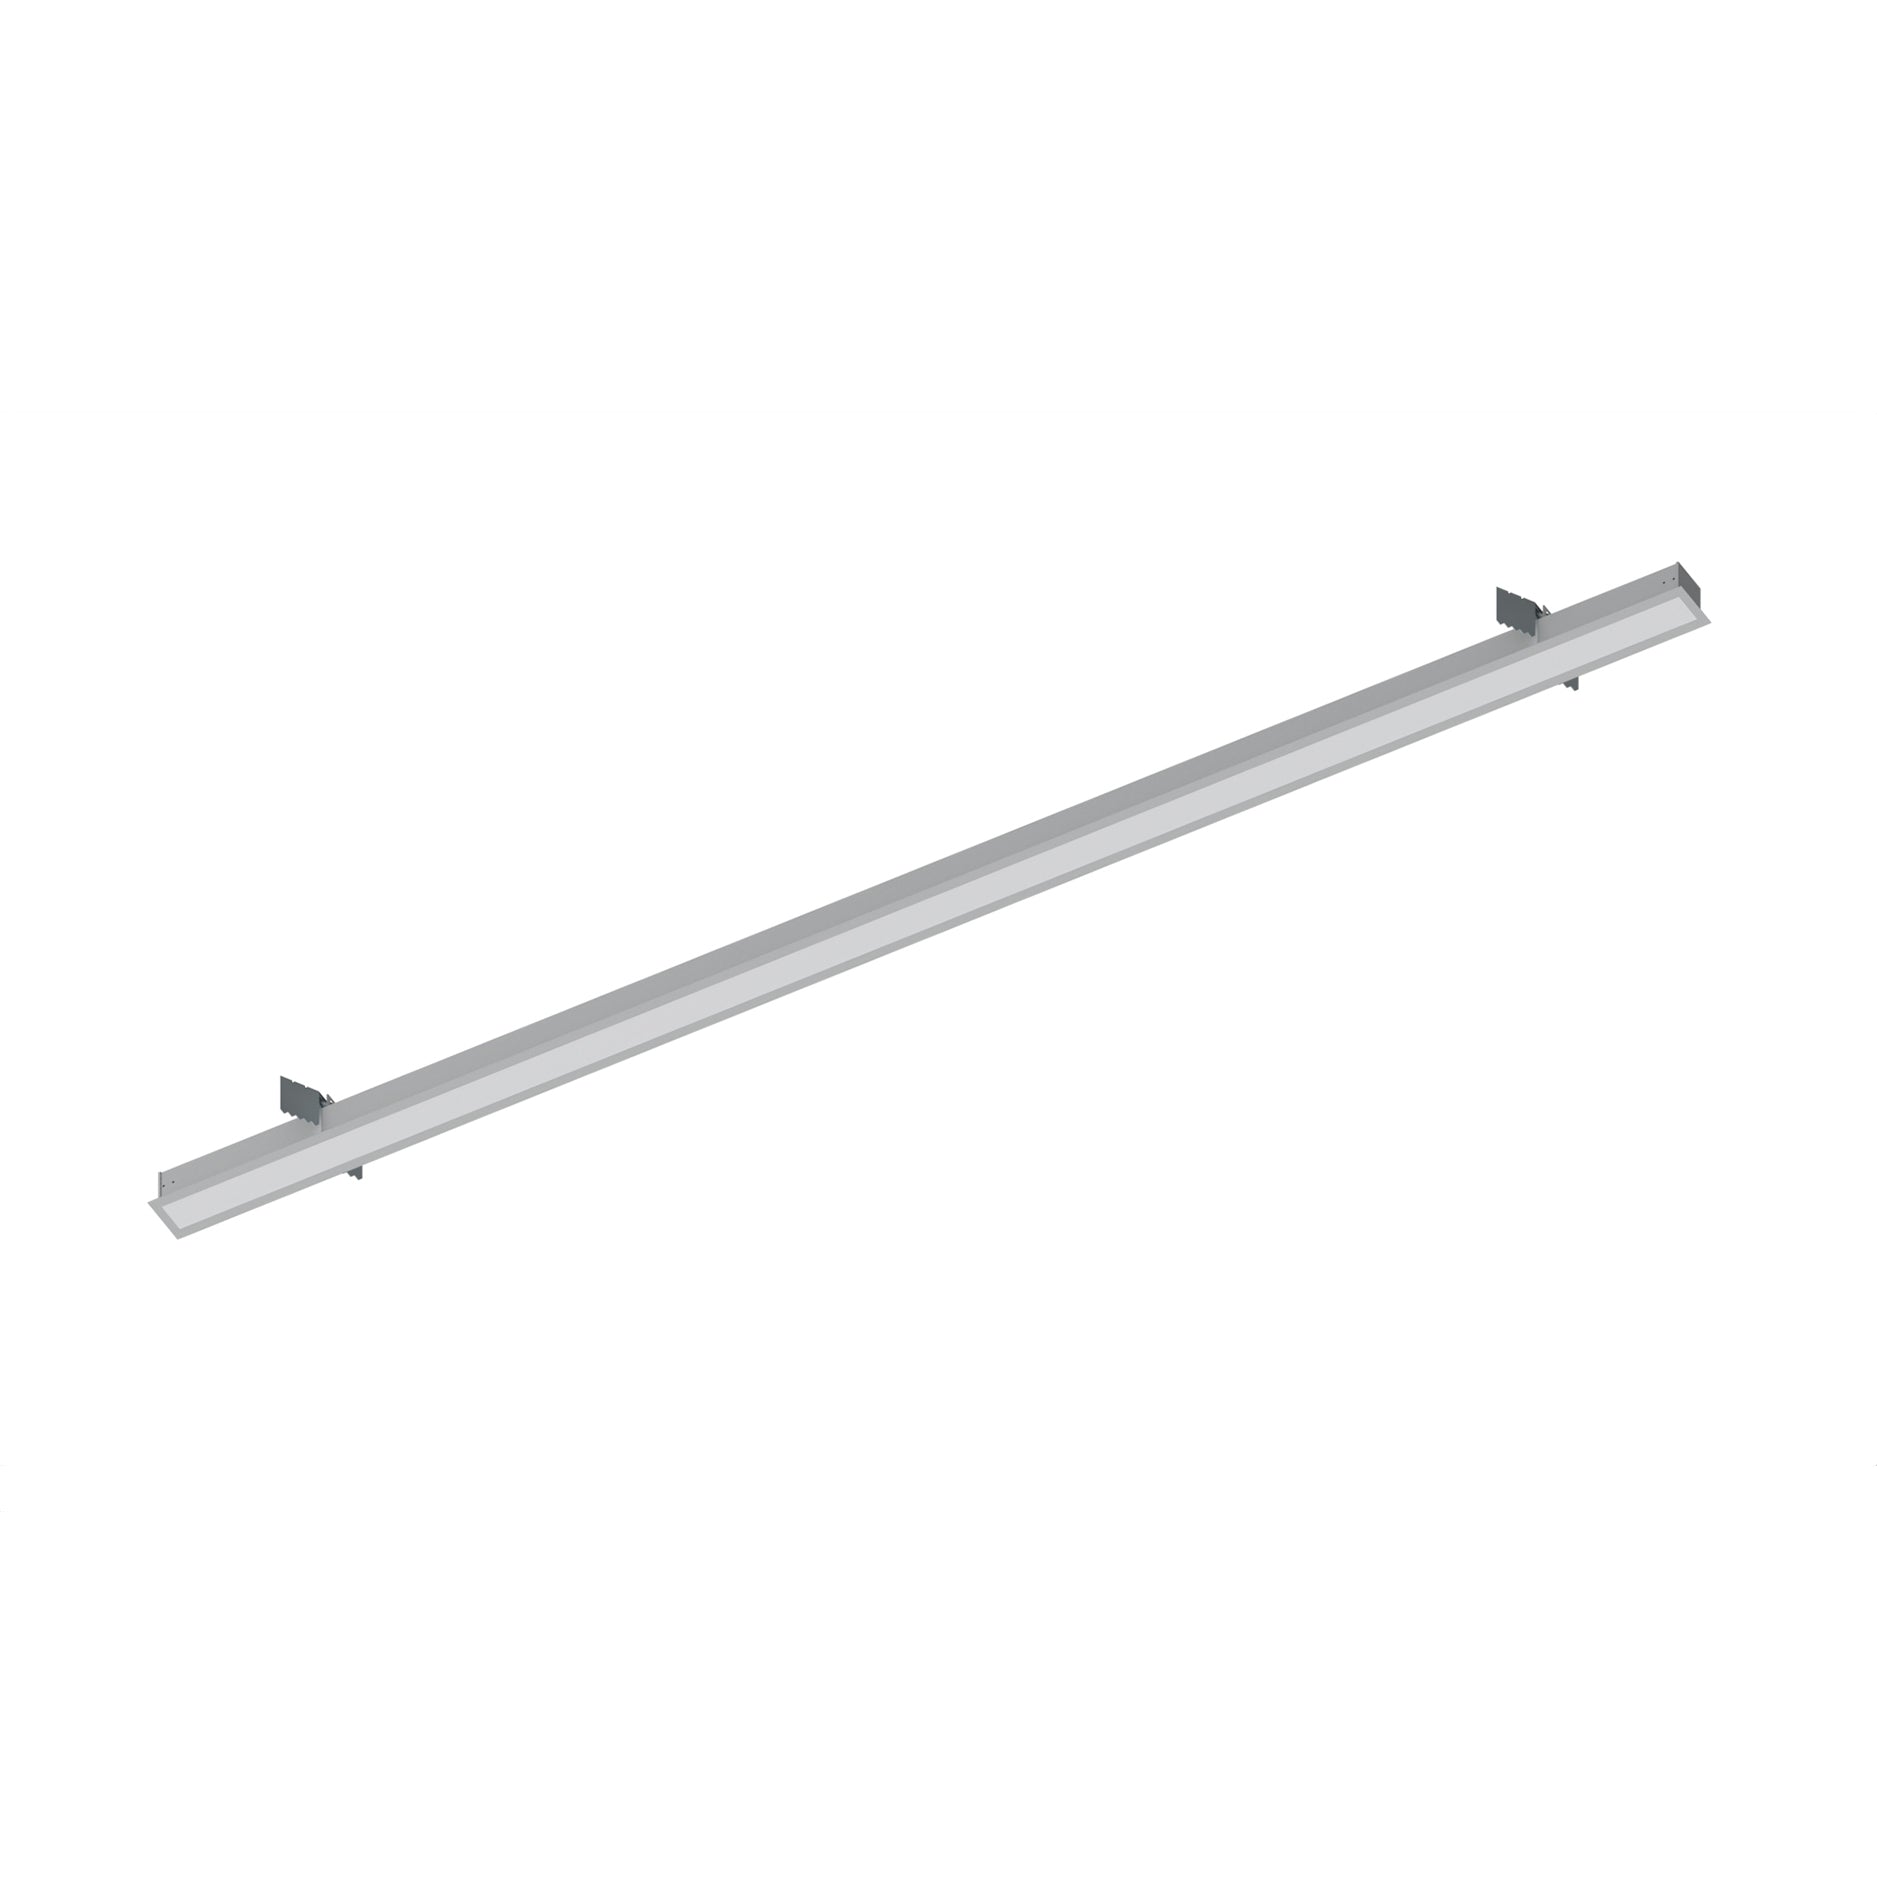 Nora Lighting NRLIN-81040A - Linear - 8' L-Line LED Recessed Linear, 8400lm / 4000K, Aluminum Finish